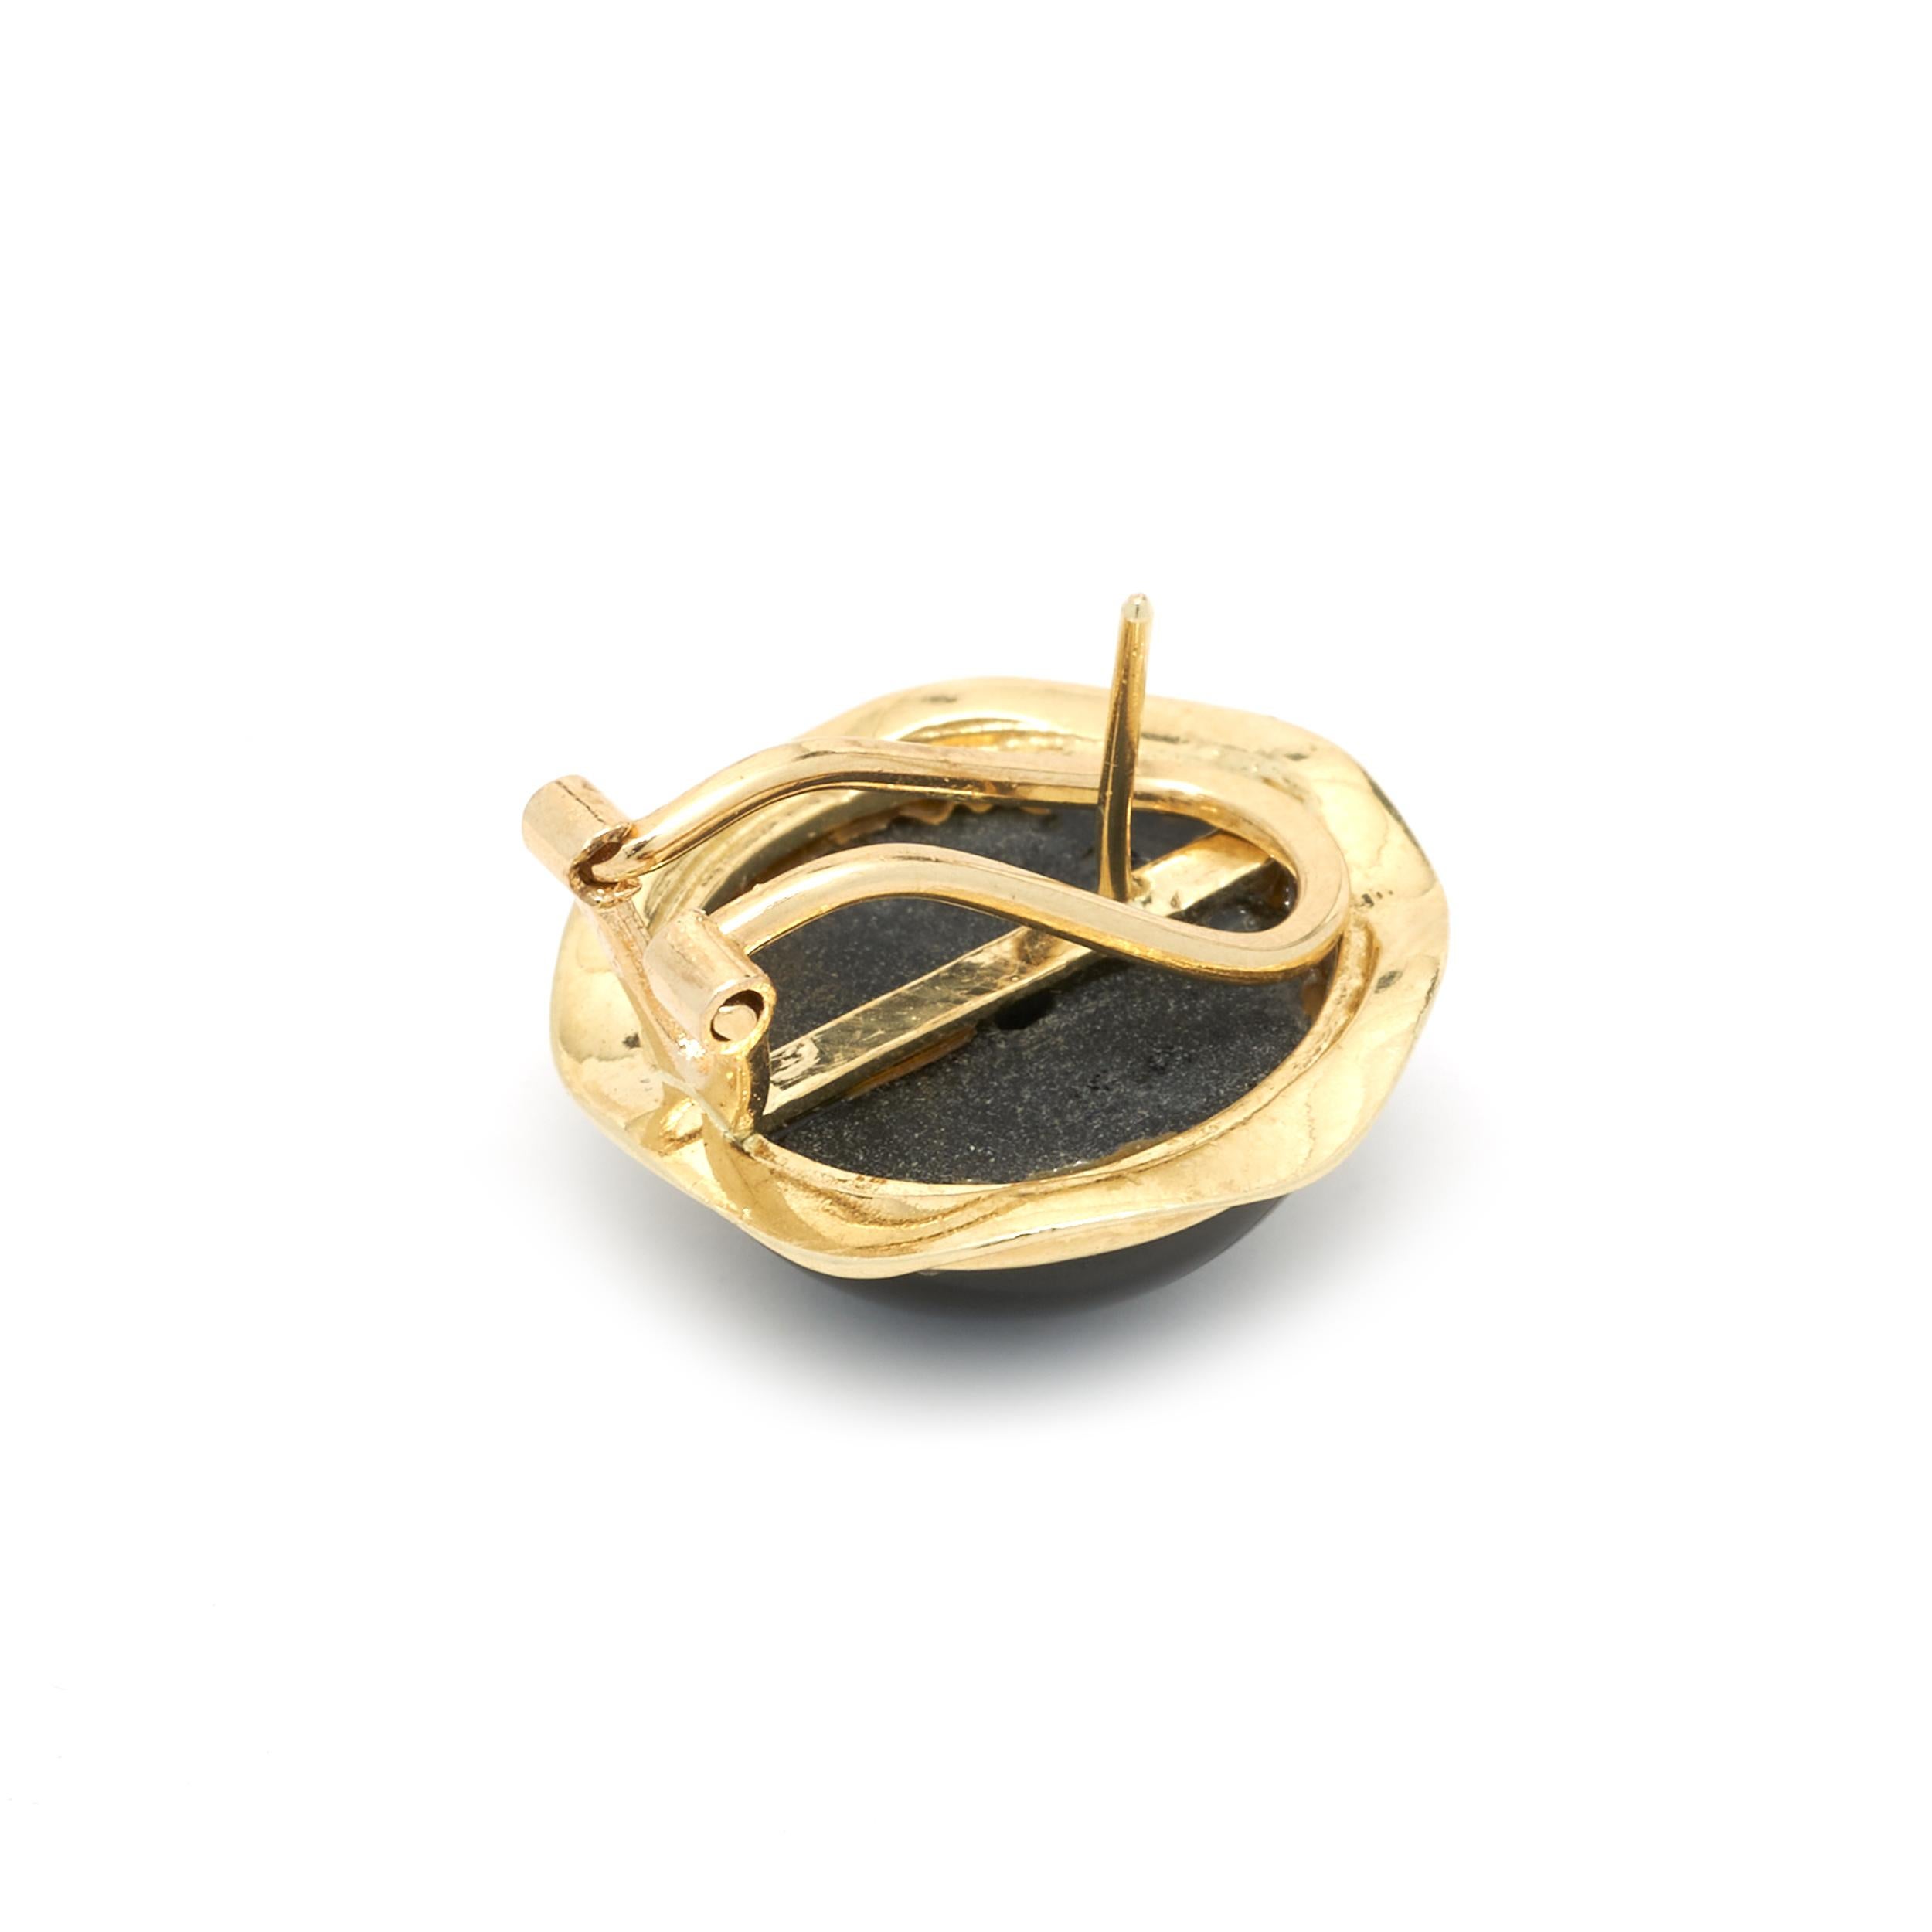 Material: 14K yellow gold
Fastenings: post with omega backs
Weight:  6 grams	
